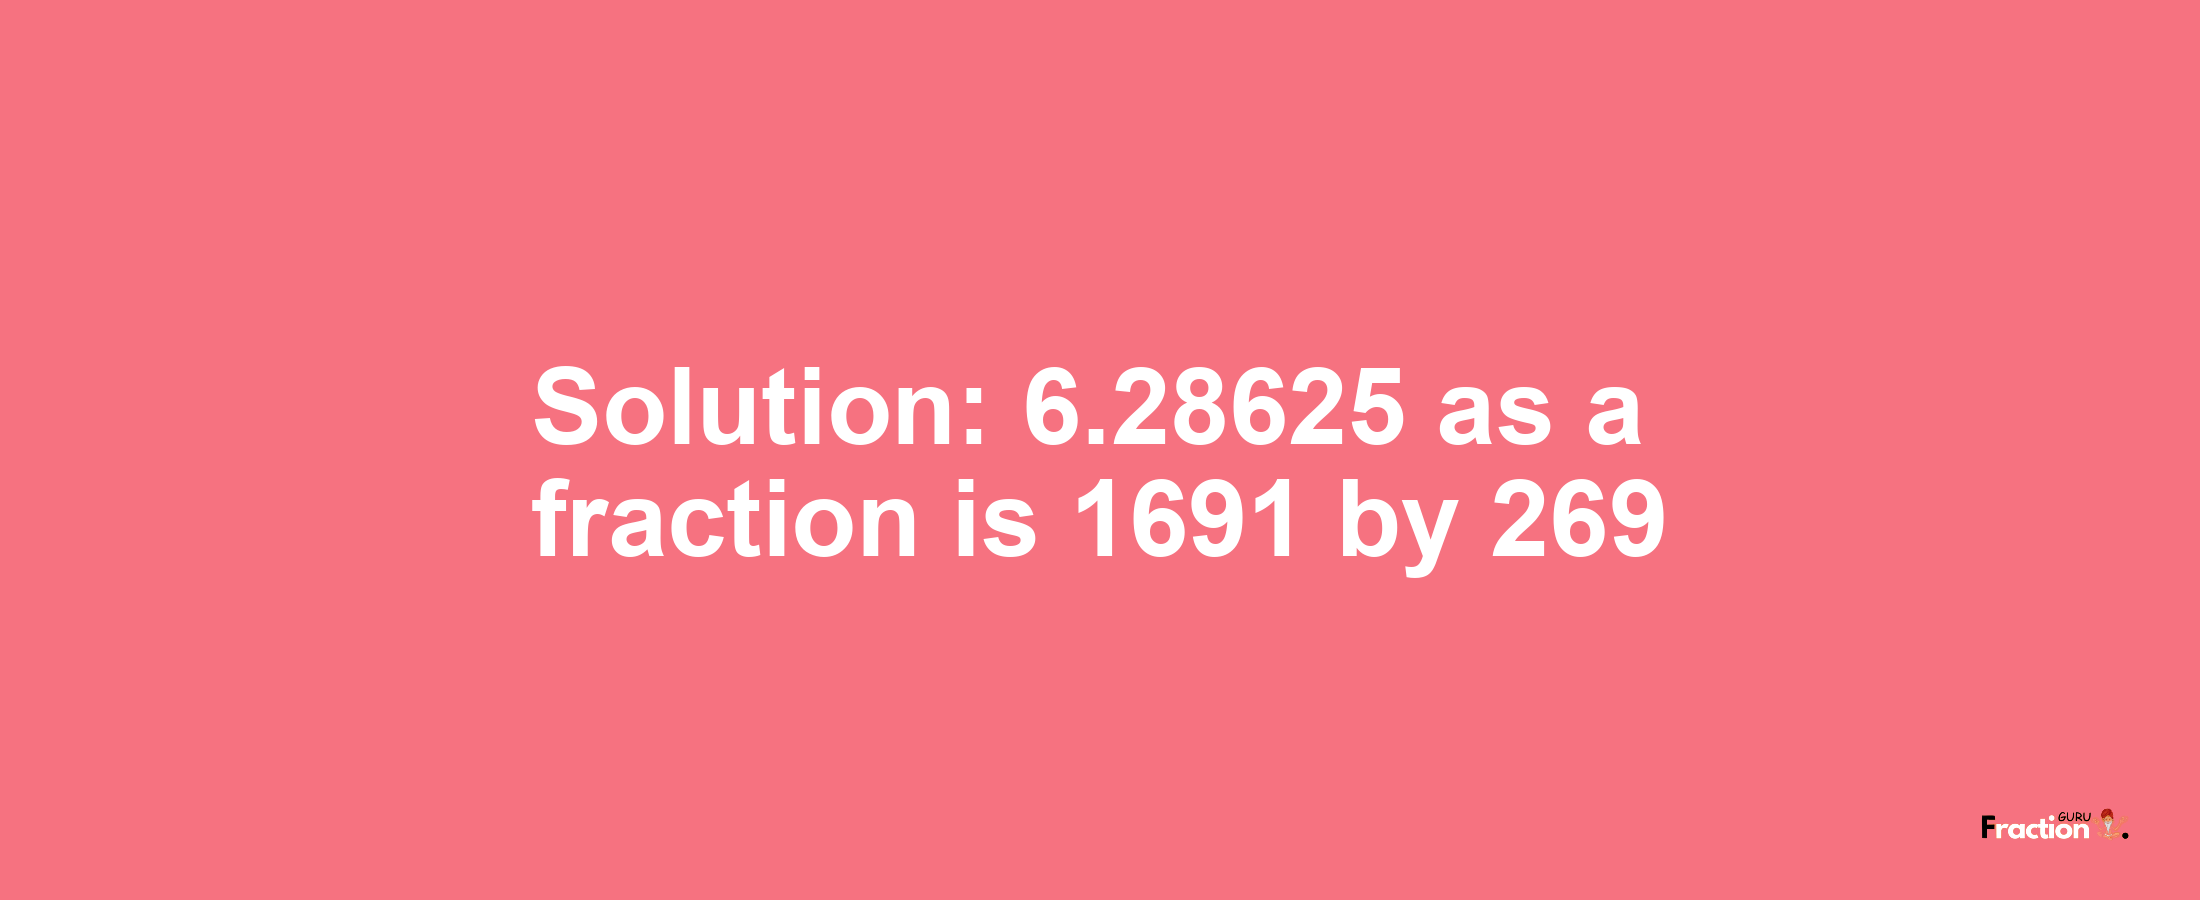 Solution:6.28625 as a fraction is 1691/269